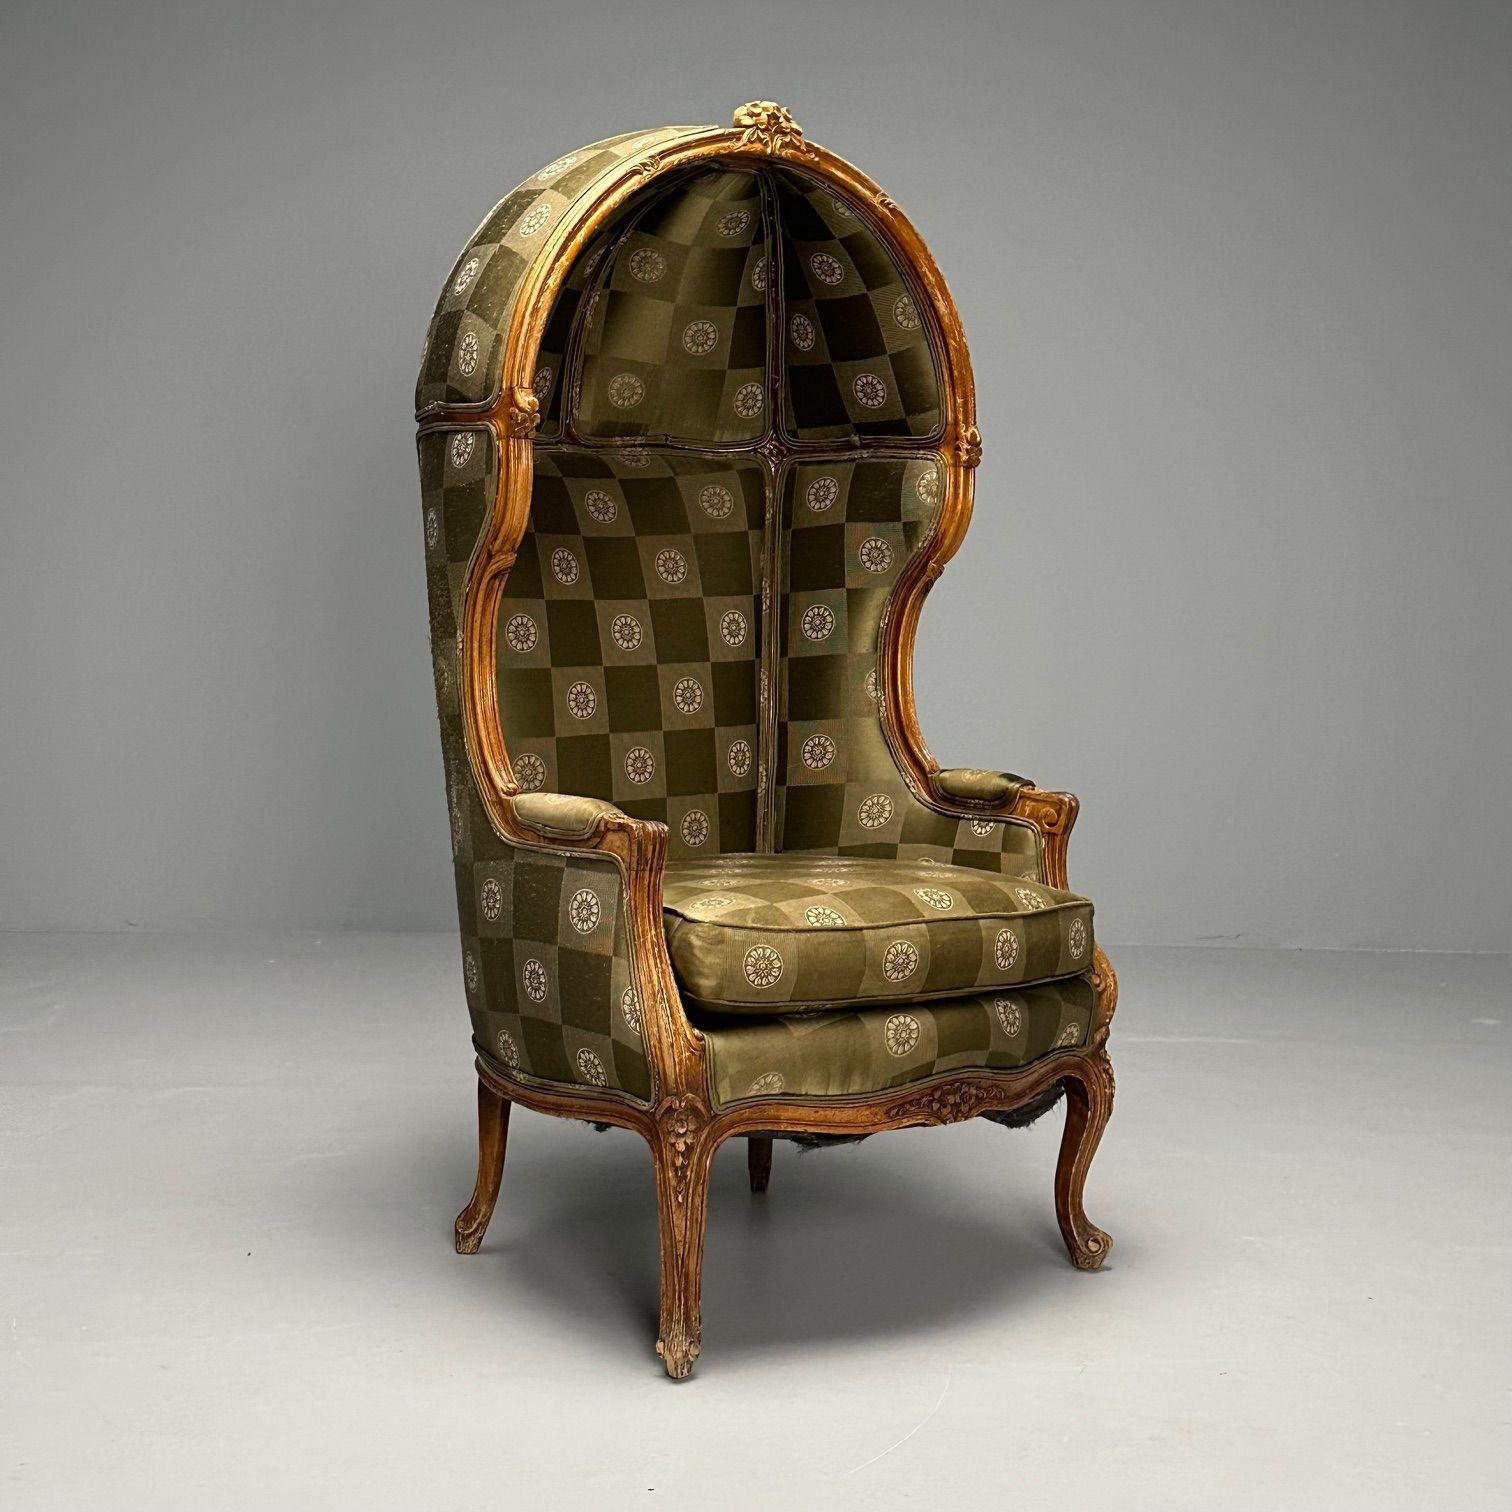 Louis XV, French Hooded Porter Chair, Green Fabric, Beech, France, 1940s
A walnut Hooded Porters chair in the Louis XV fashion. A wonderful, finely carved rose motif adorns the solid and sturdy frame. Price reflects the chair's need for